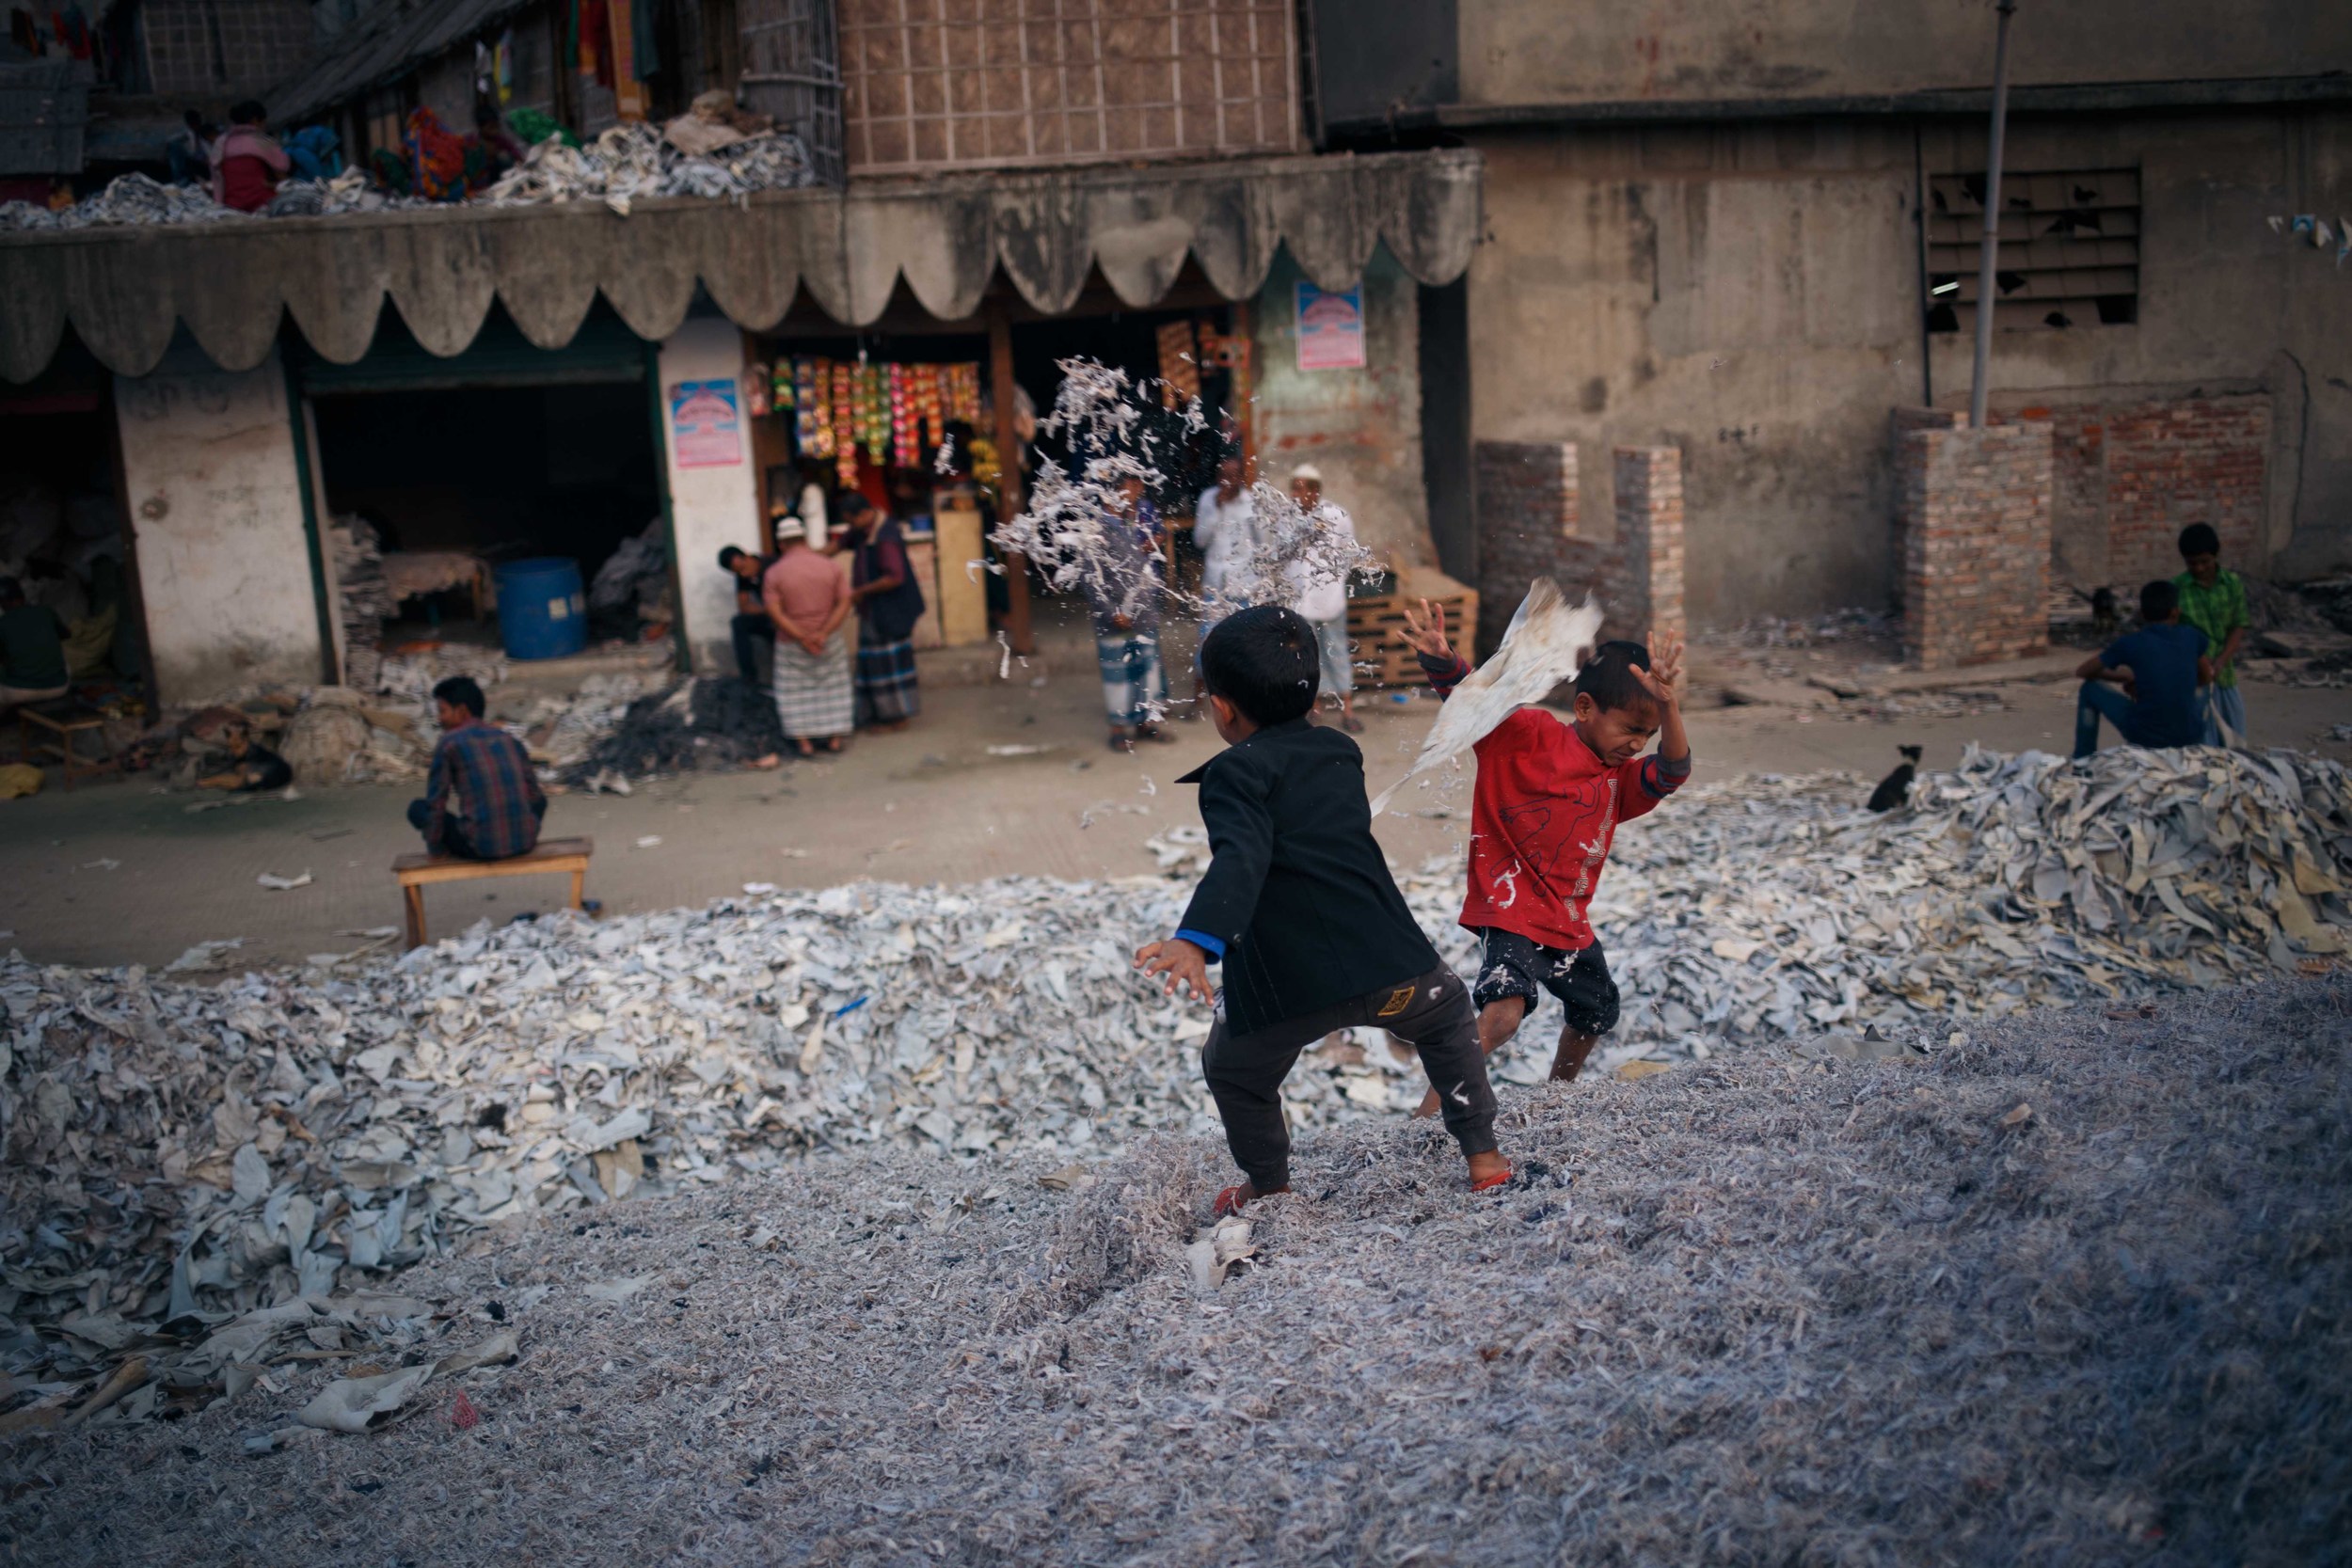  Children play among piles of discarded leather. 